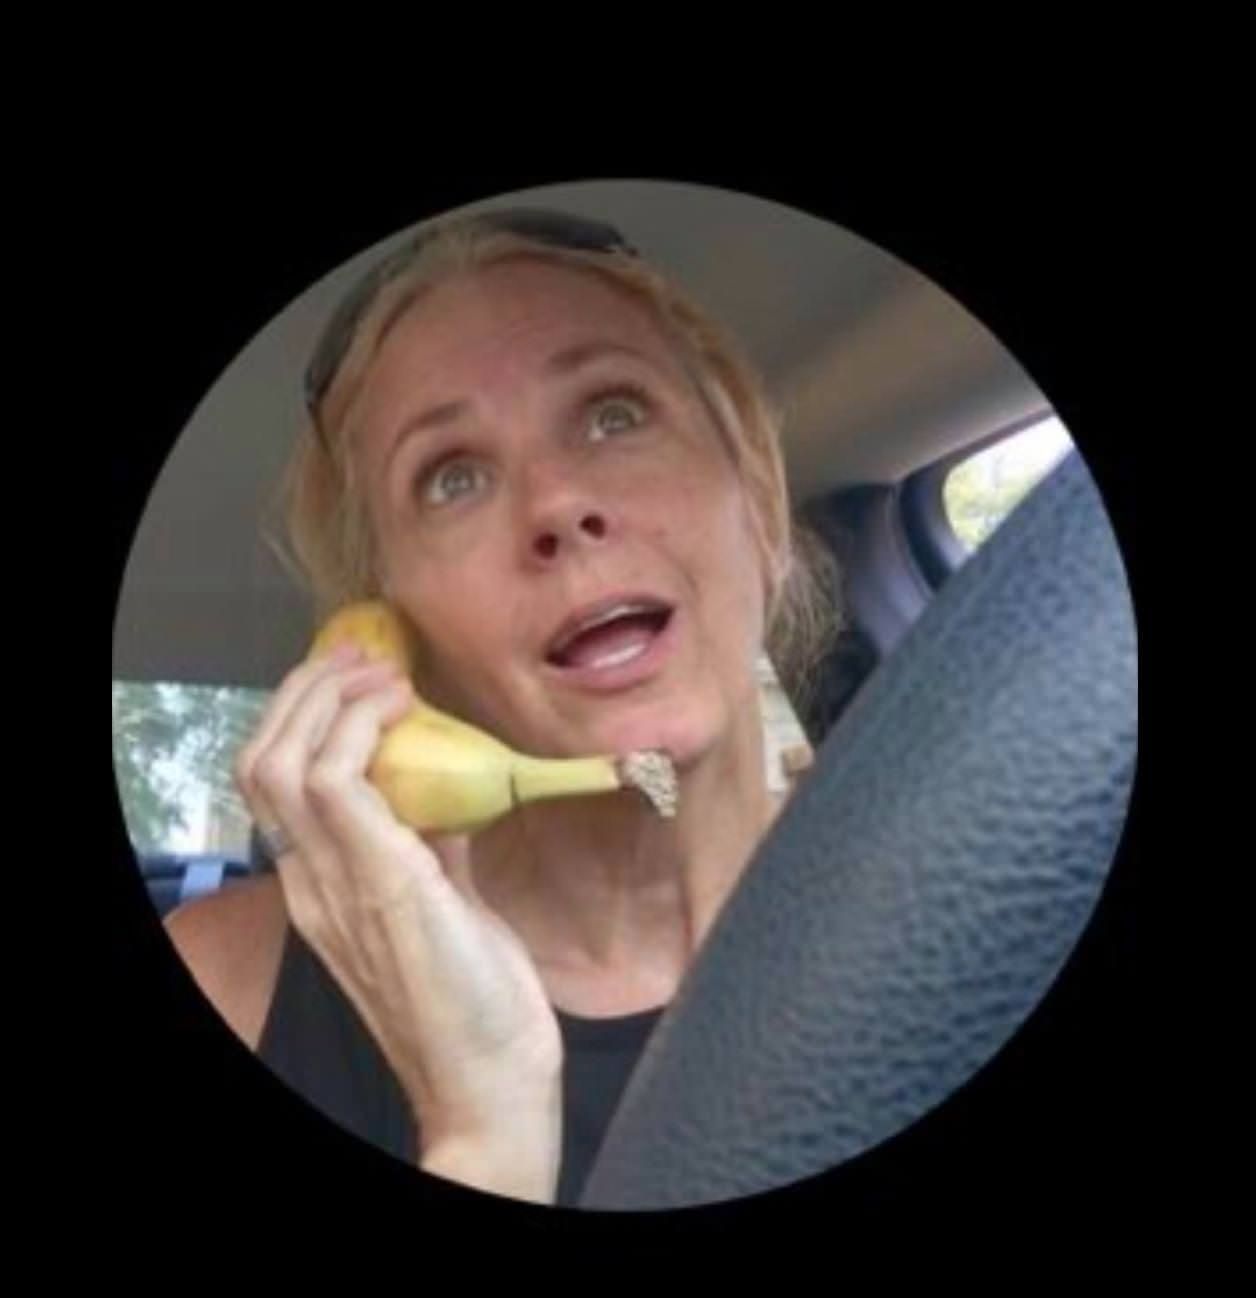 This was my Uber driver the other day and I would trust her to drive me anywhere